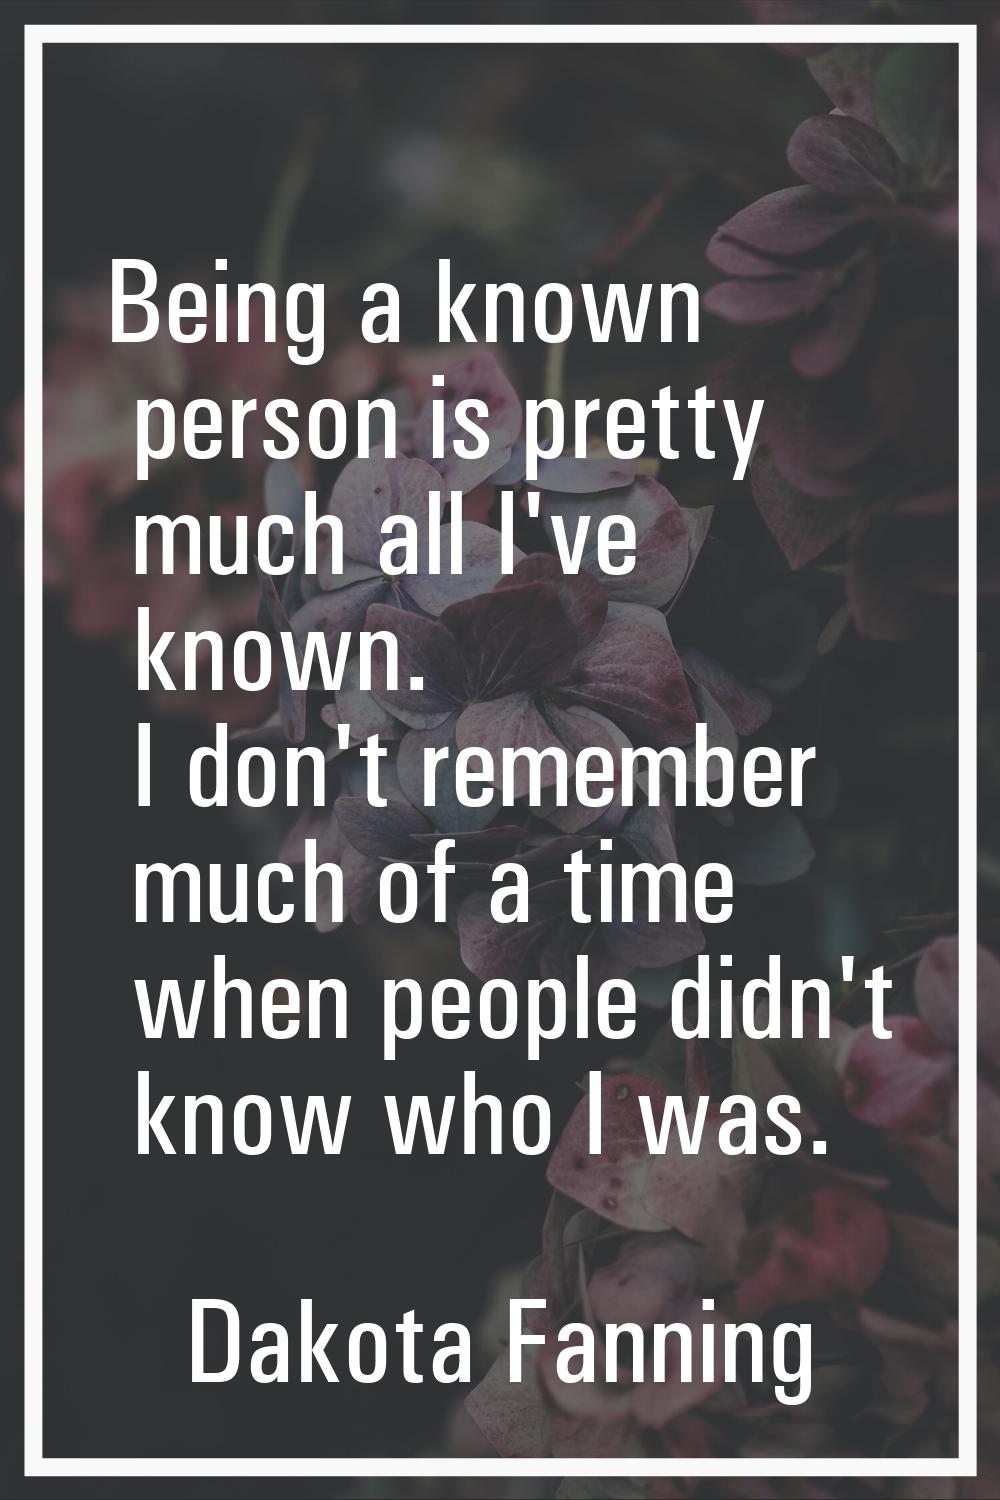 Being a known person is pretty much all I've known. I don't remember much of a time when people did